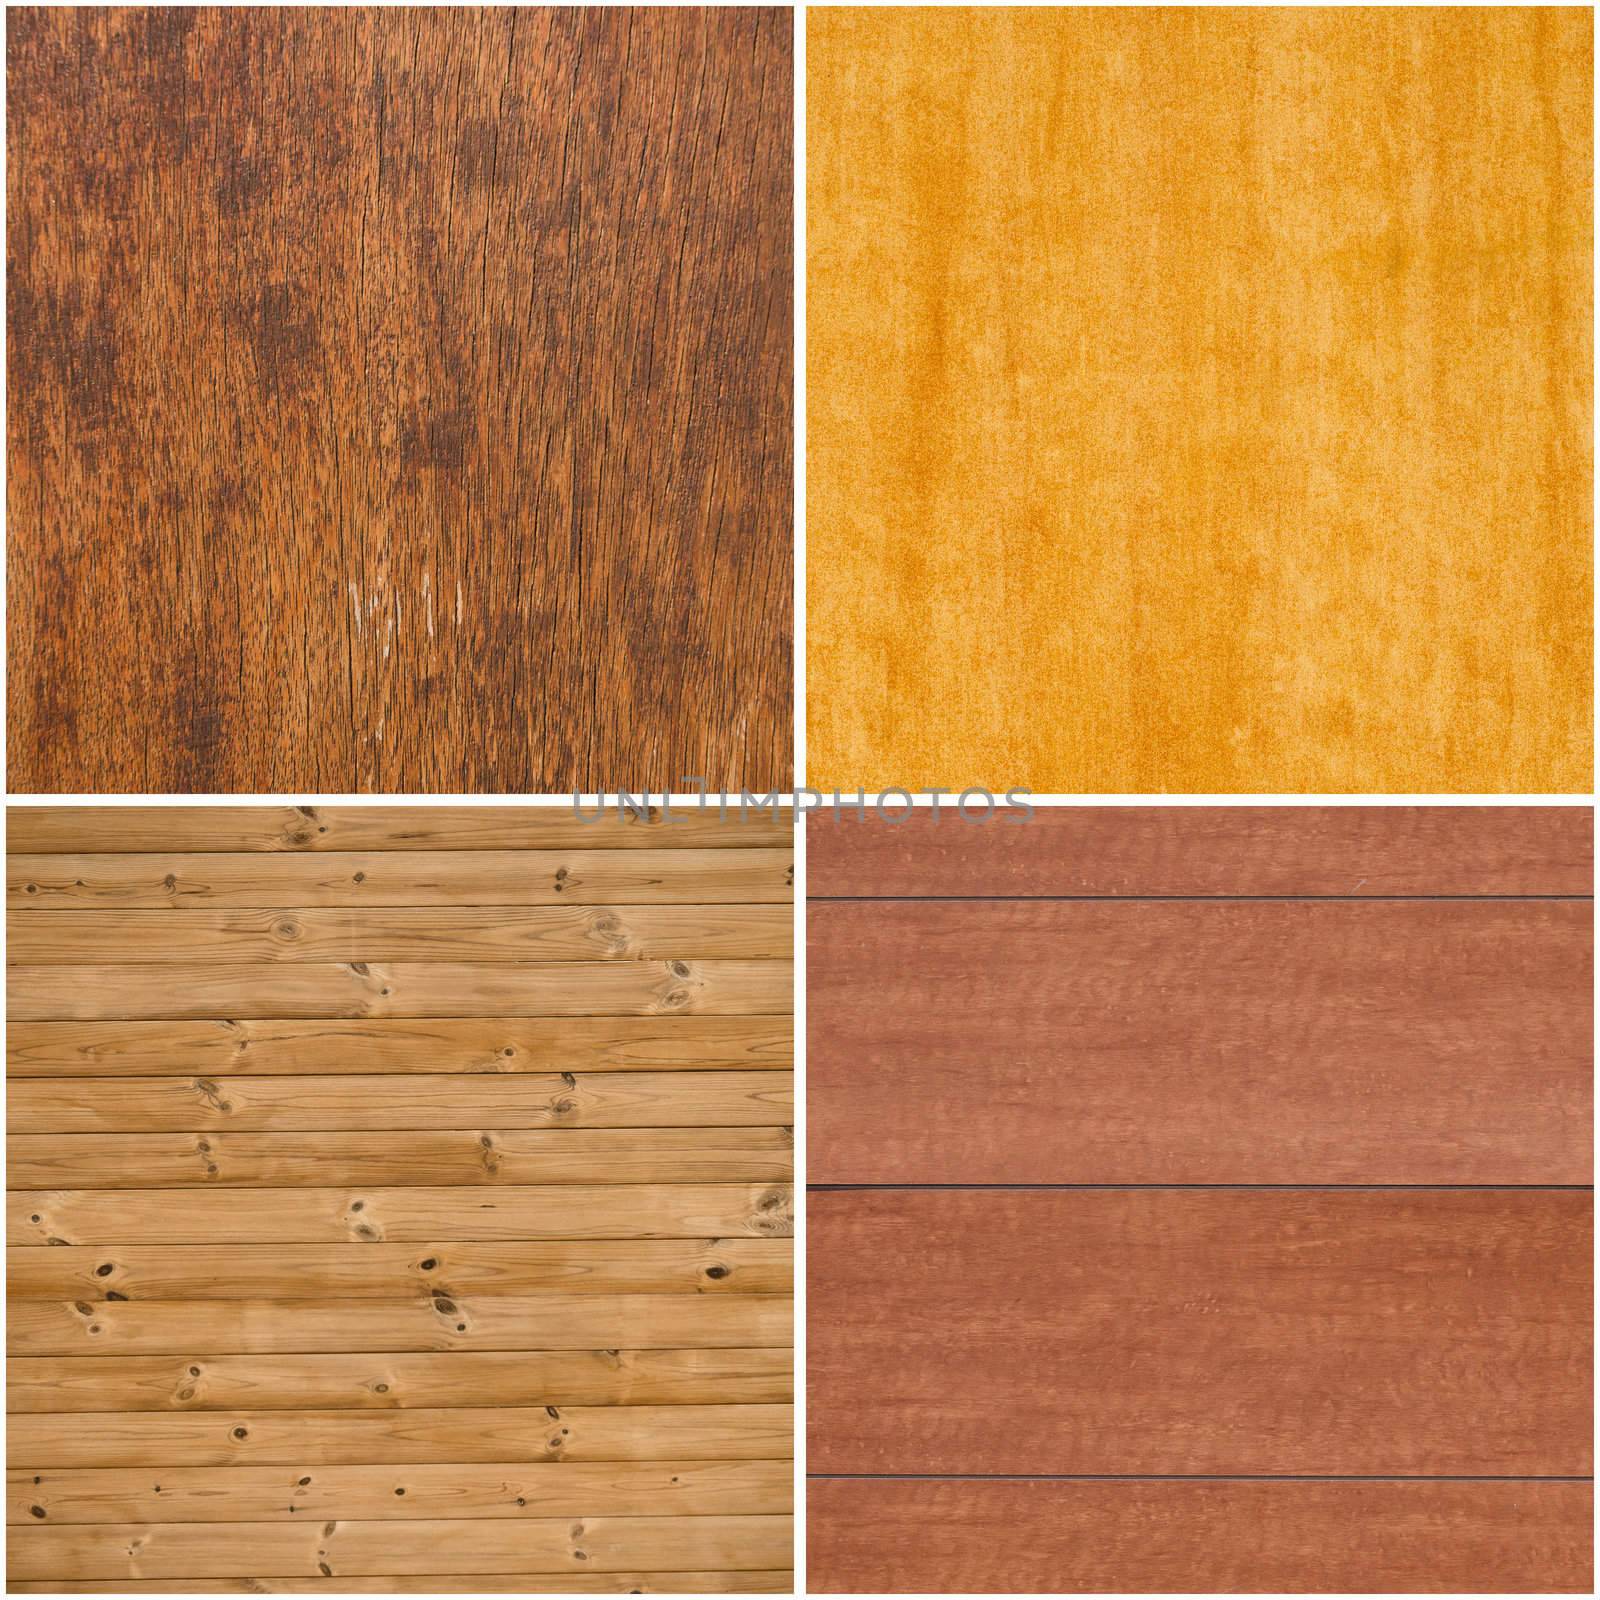 Set of four wooden textures, backgrounds.